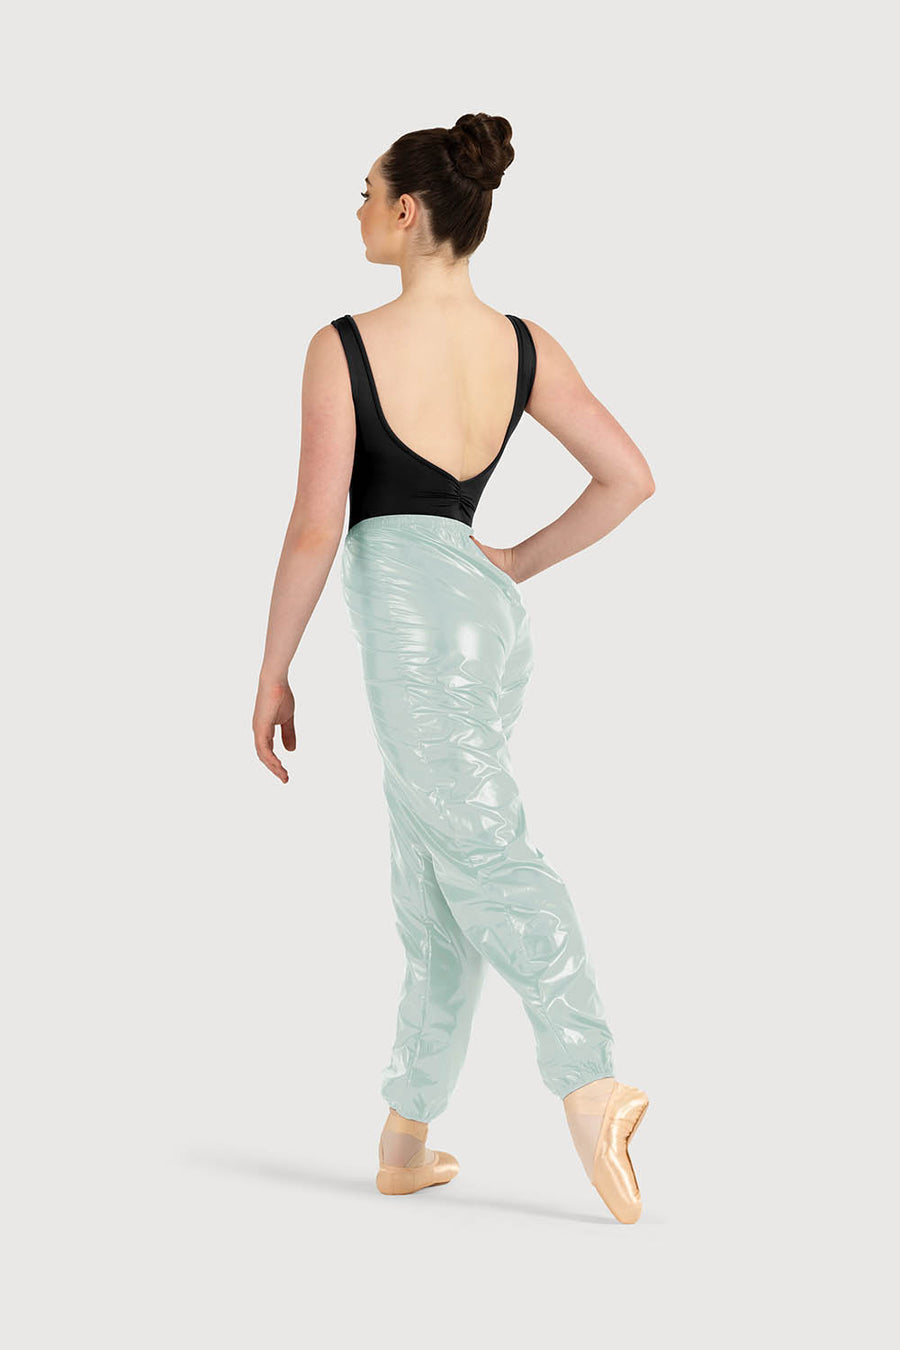 Adult Pearlescent Ripstop Pants